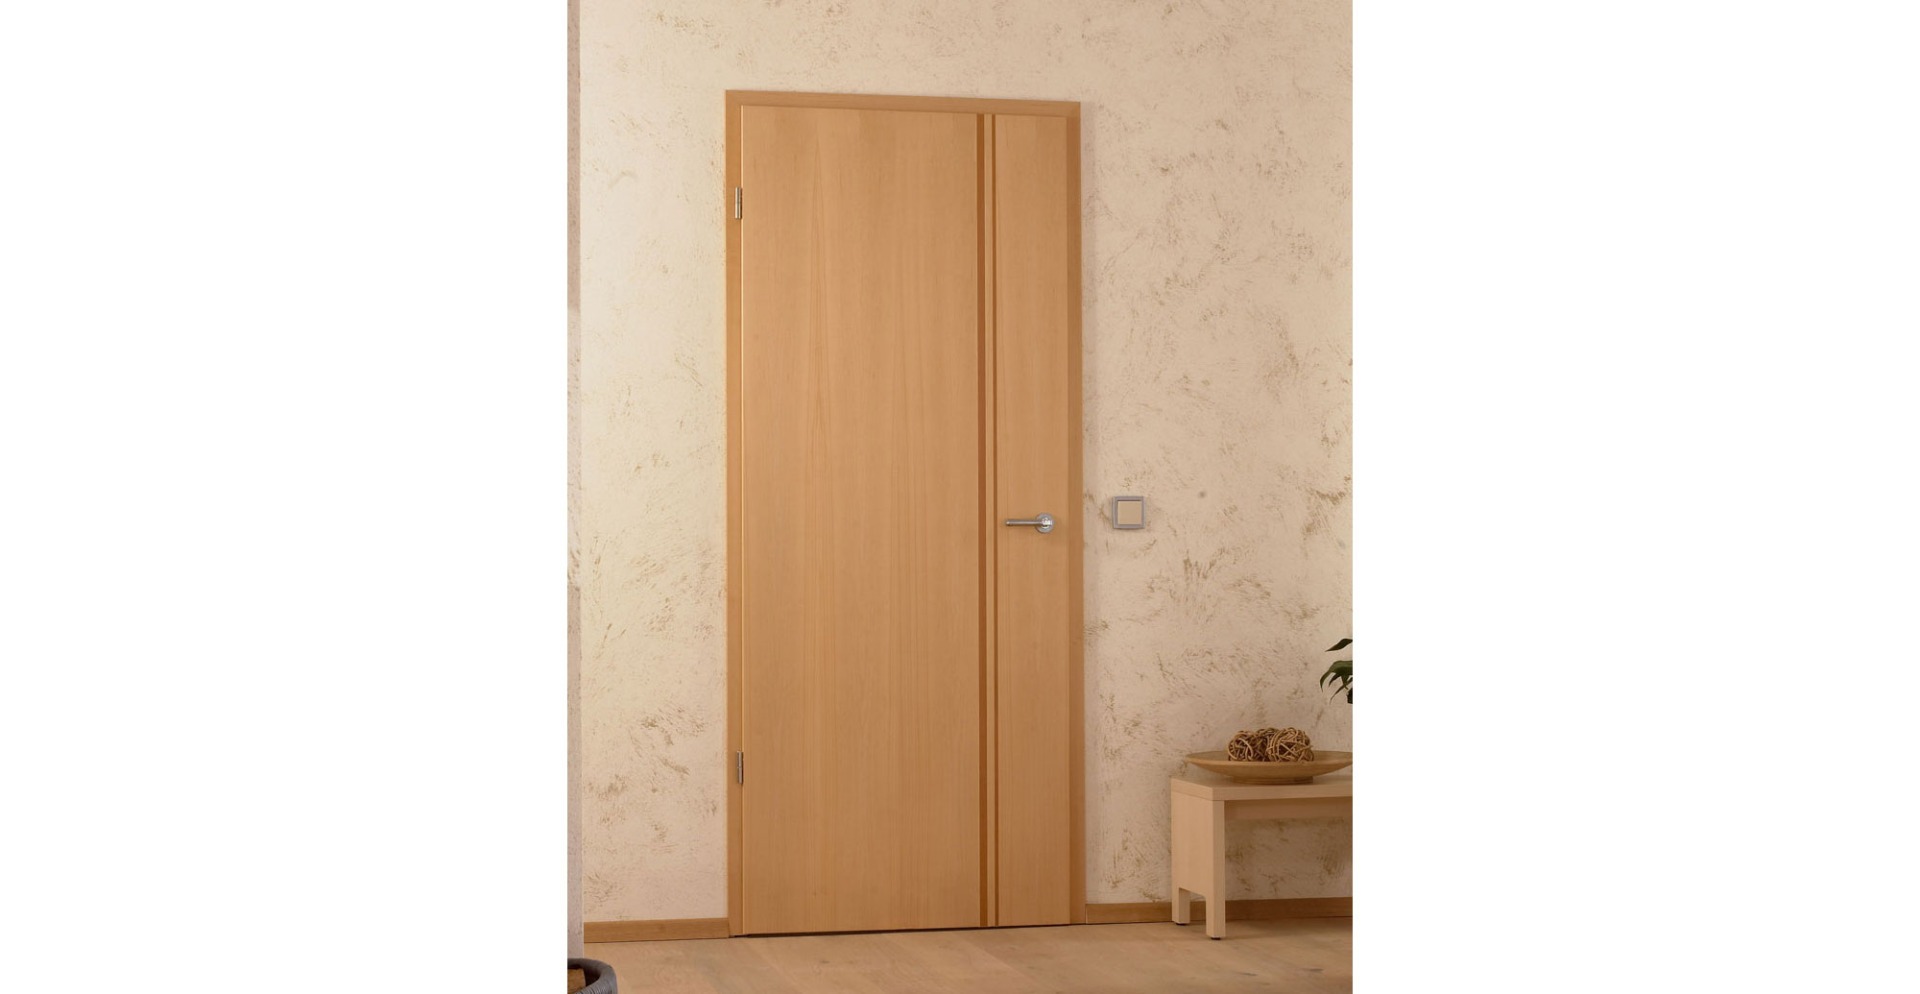 Maple Doors - Bespoke fire doors are a great choice for any home